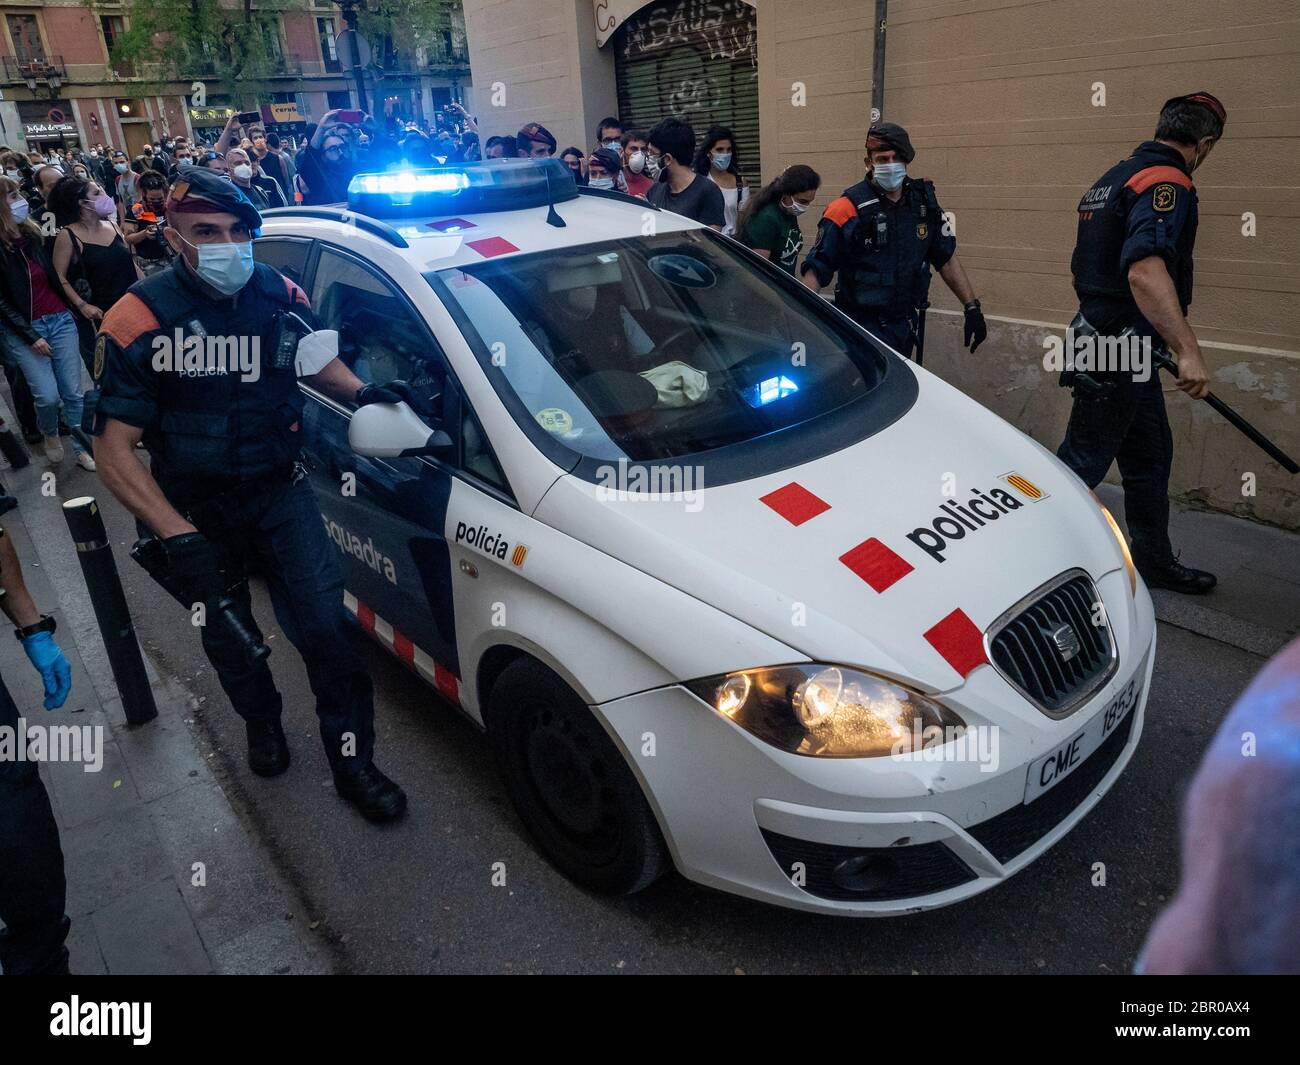 First protest in Barcelona with moments of tension with the police. There was a detainee and many identified by the police (Mossos d'Esquadra) "The he Stock Photo